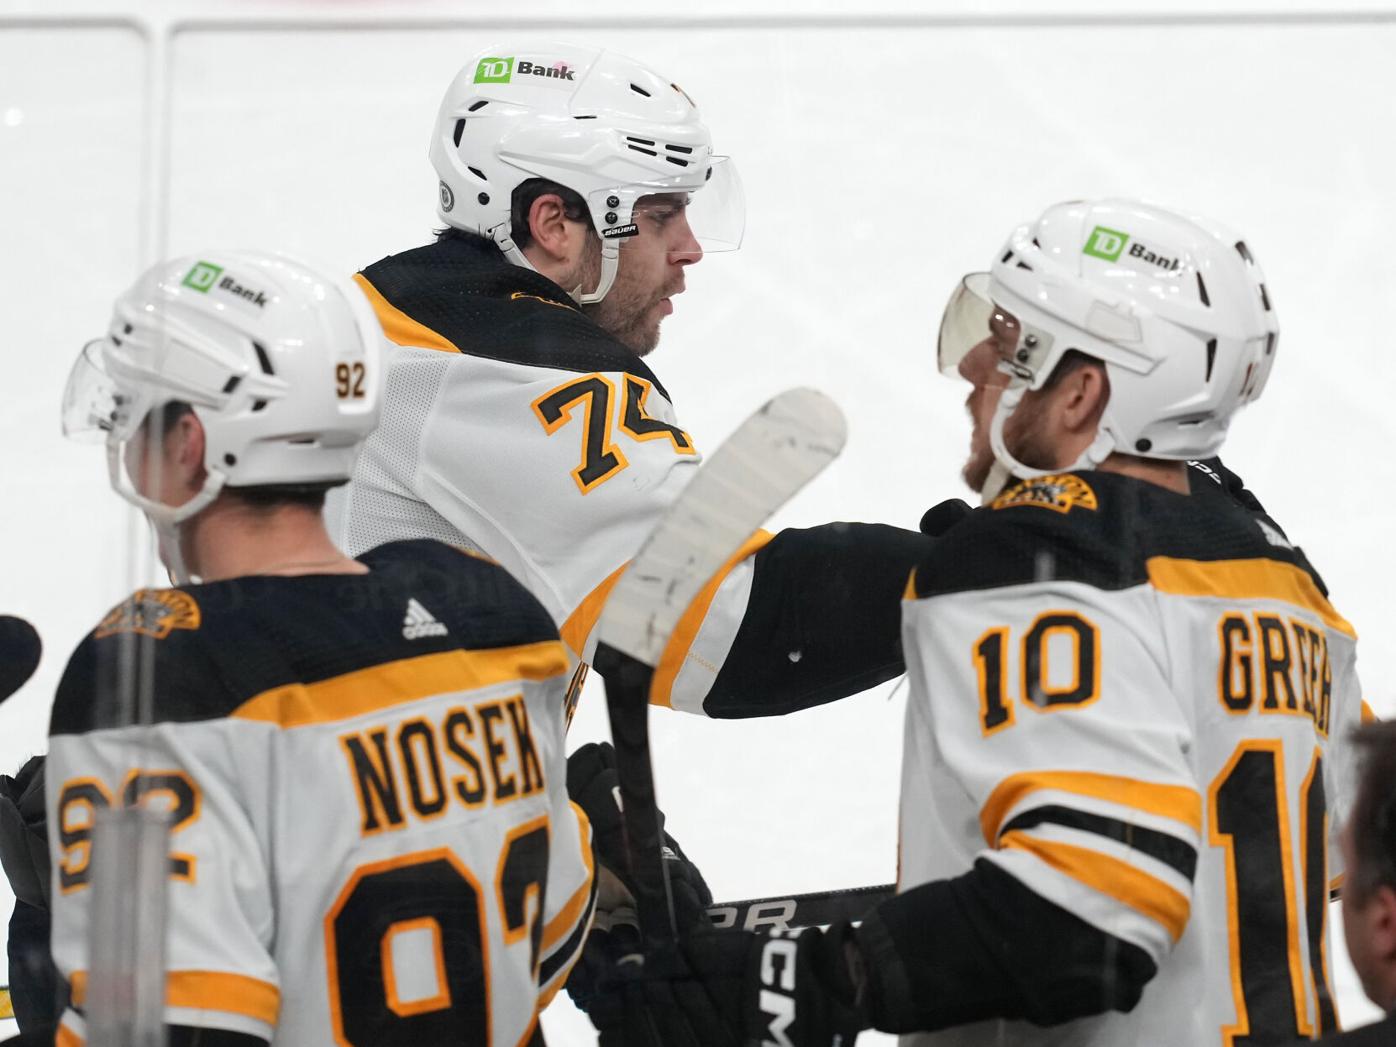 Boston Bruins' Bruce Cassidy on scratching Jake DeBrusk: 'You need to help  this team win' 